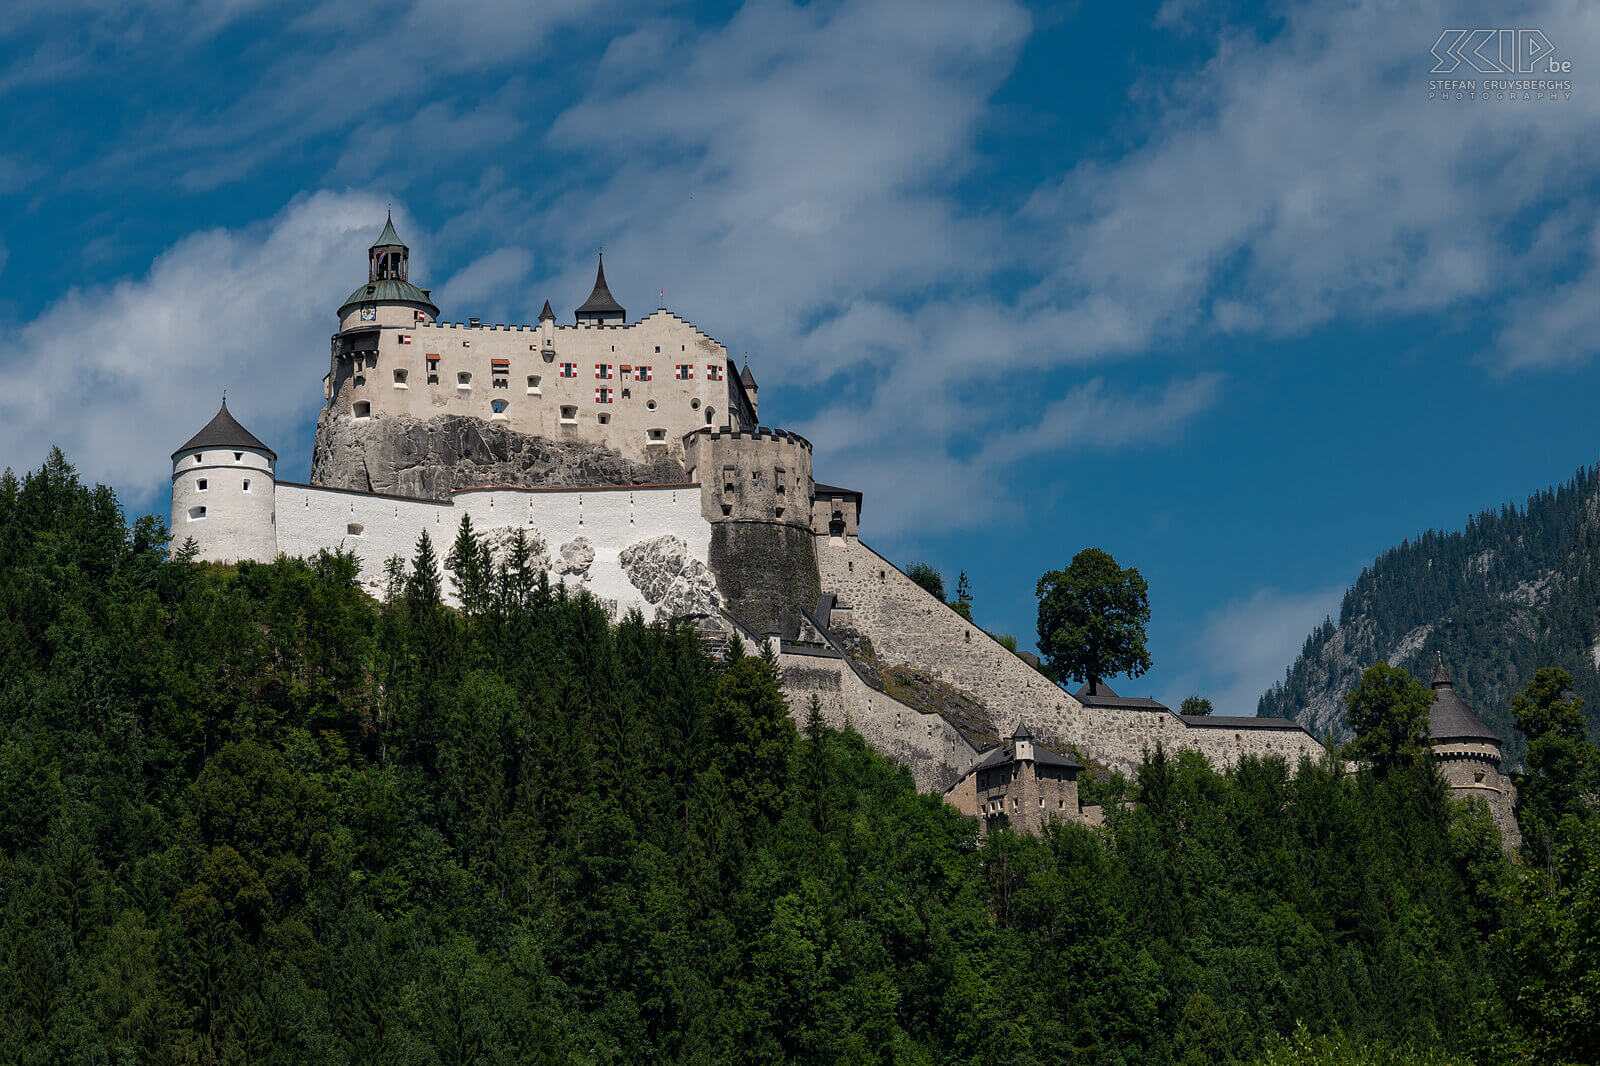 Castle Hohenwerfen The medieval castle of Hohenwerfen in SalzburgerLand is one of the most beautiful castles in Austria and is fantastically situated on a 113 meter high rock. Over the years it served as a military base, residence, hunting lodge and prison during WWII. Stefan Cruysberghs